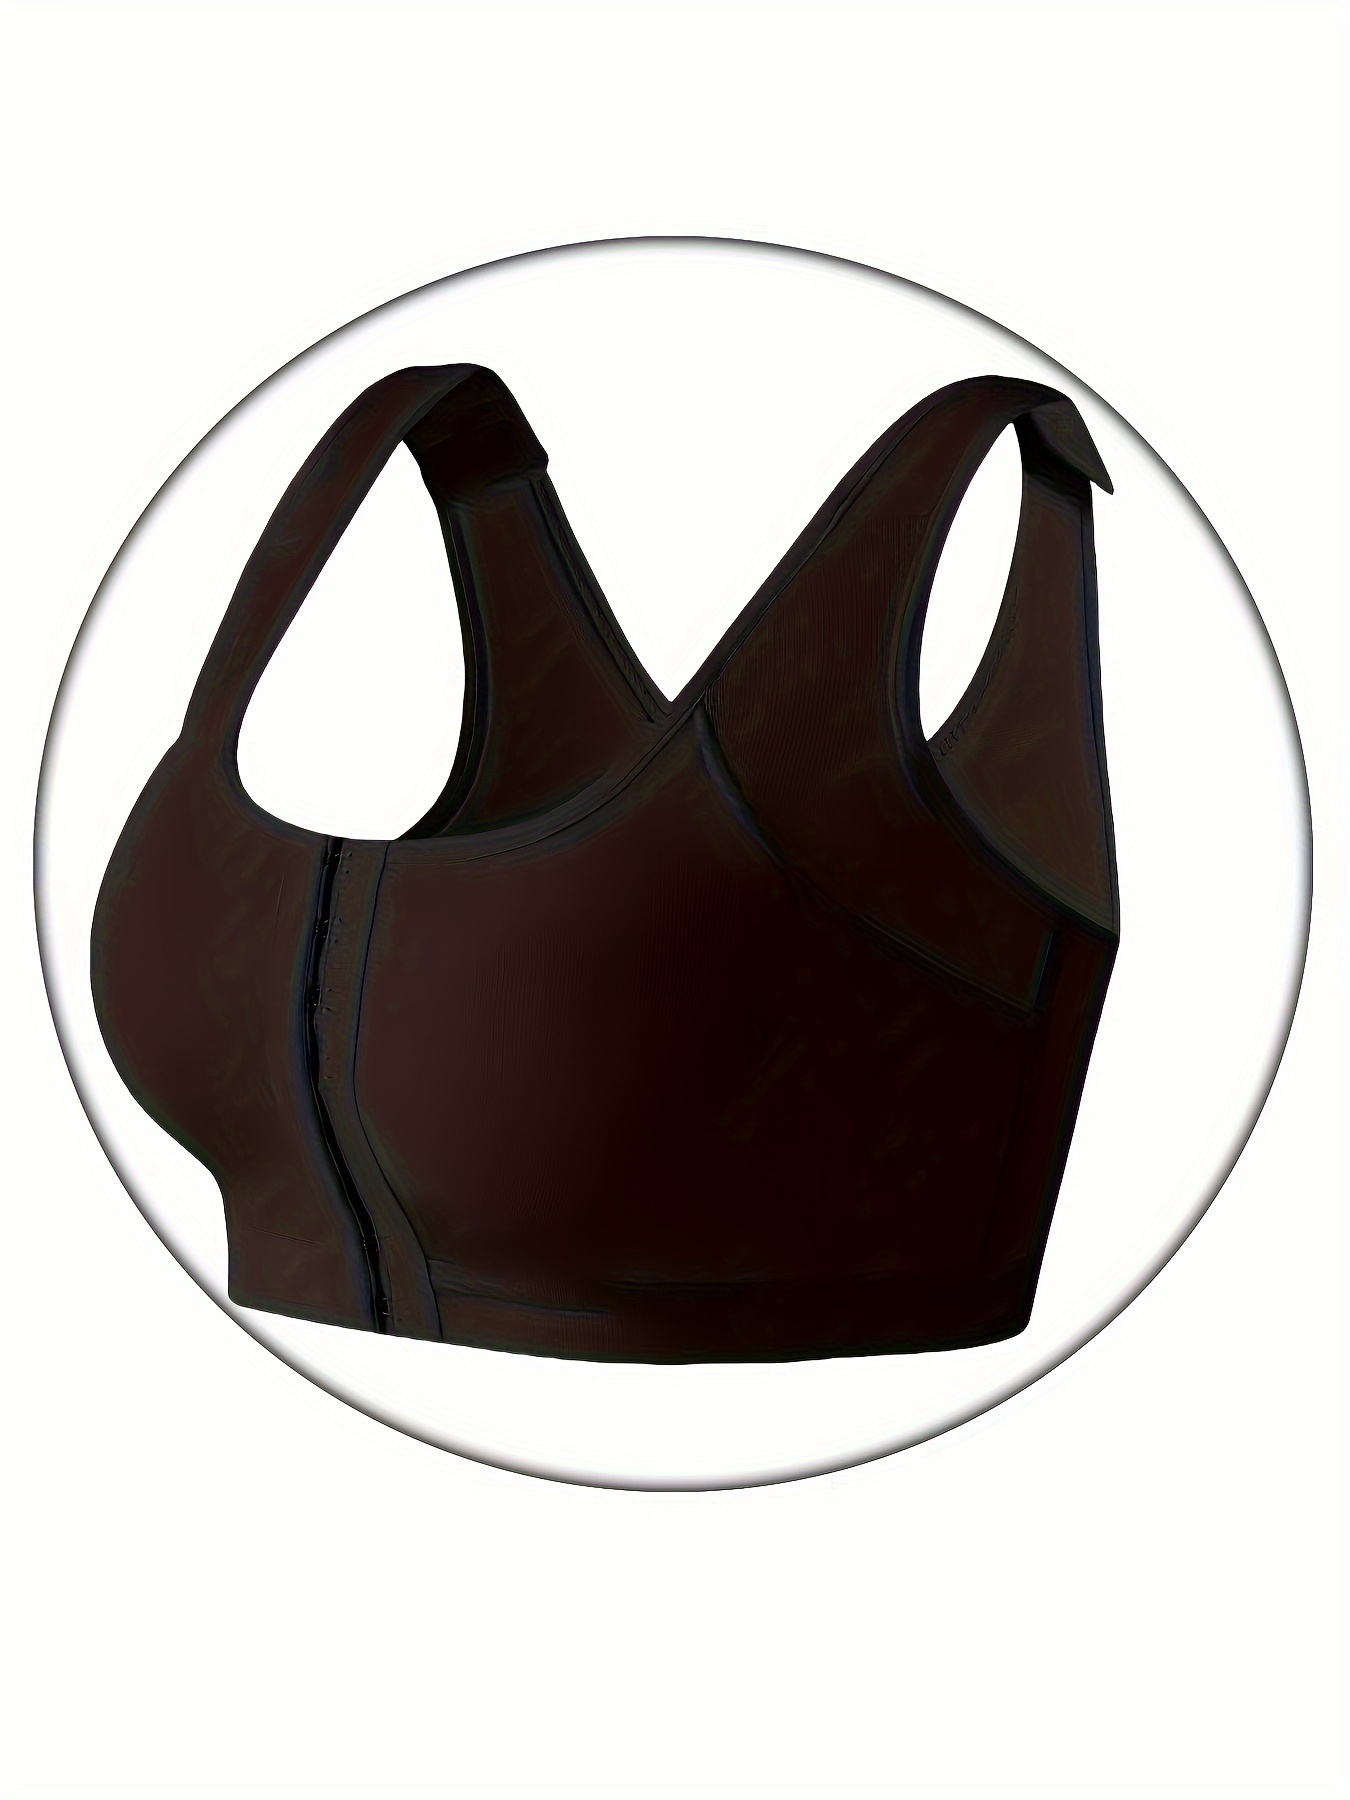 Front Closure Bras, Lift Up And Support Your Back Wireless Sports Bra,  Women's Underwear